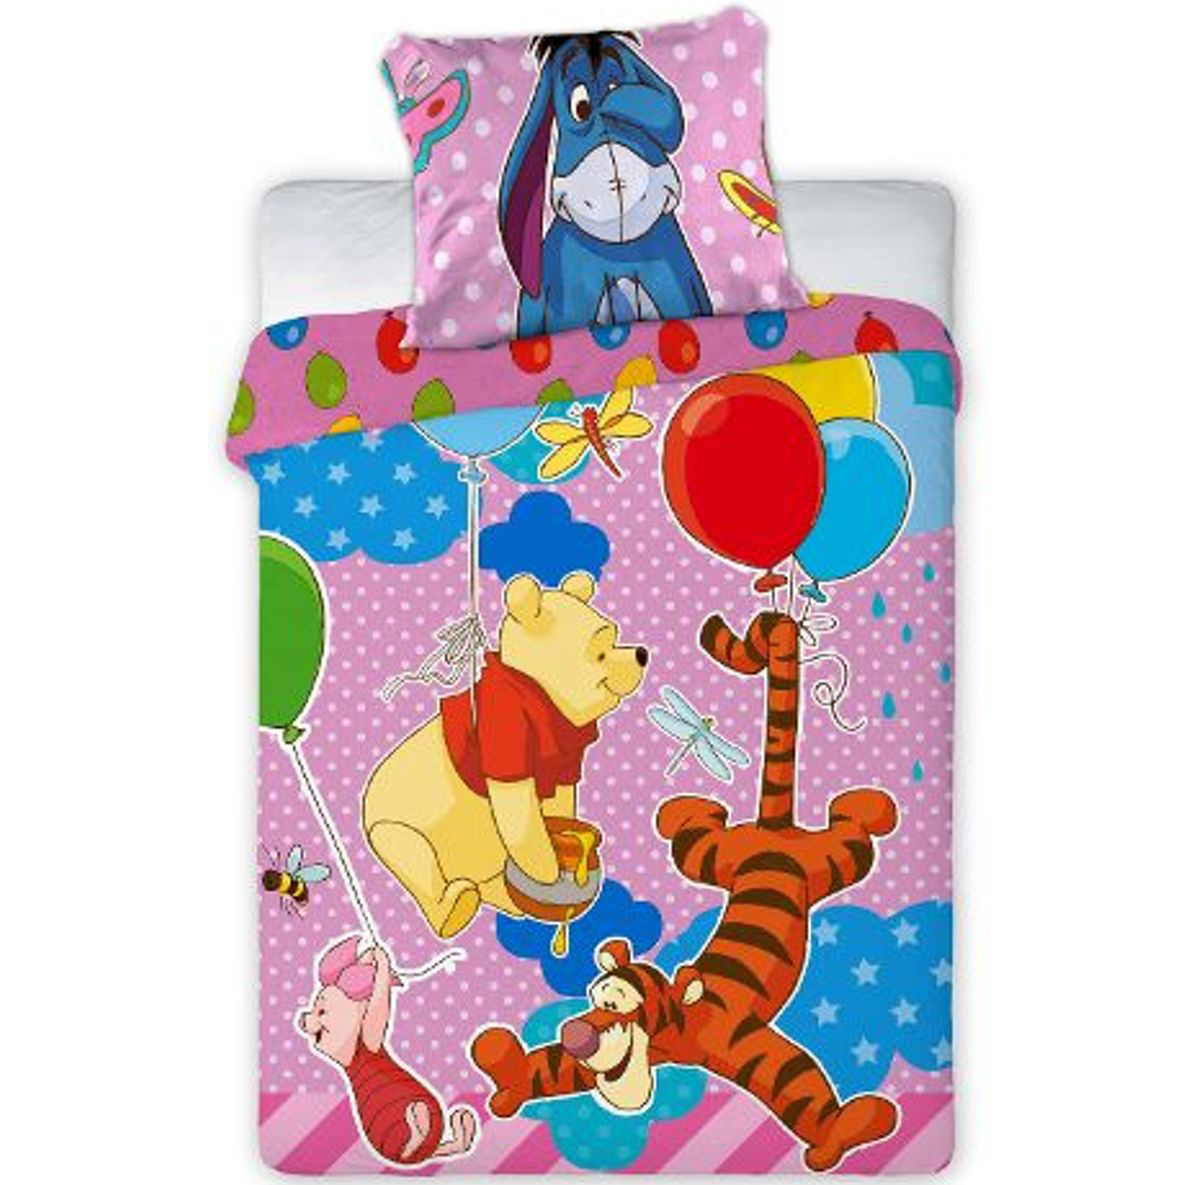 Disney Winnie the Pooh Party - BABY duvet cover - 100 x 135 cm - Pink